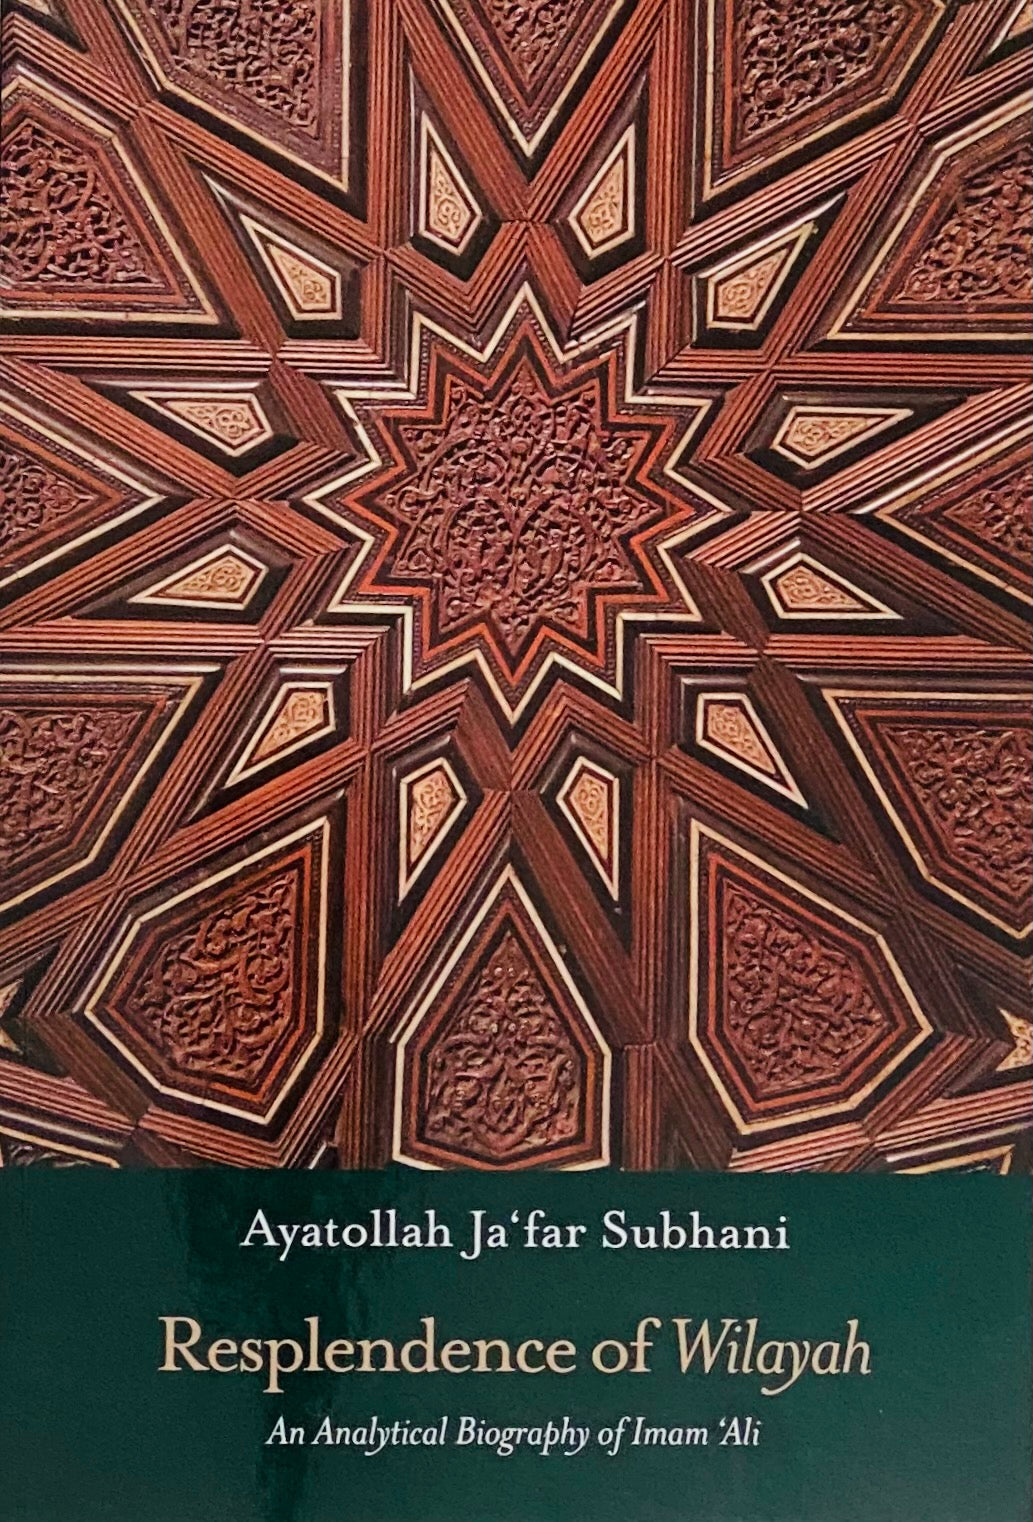 Resplendence of Wilayah: An Analytical Biography of Imam ‘Ali